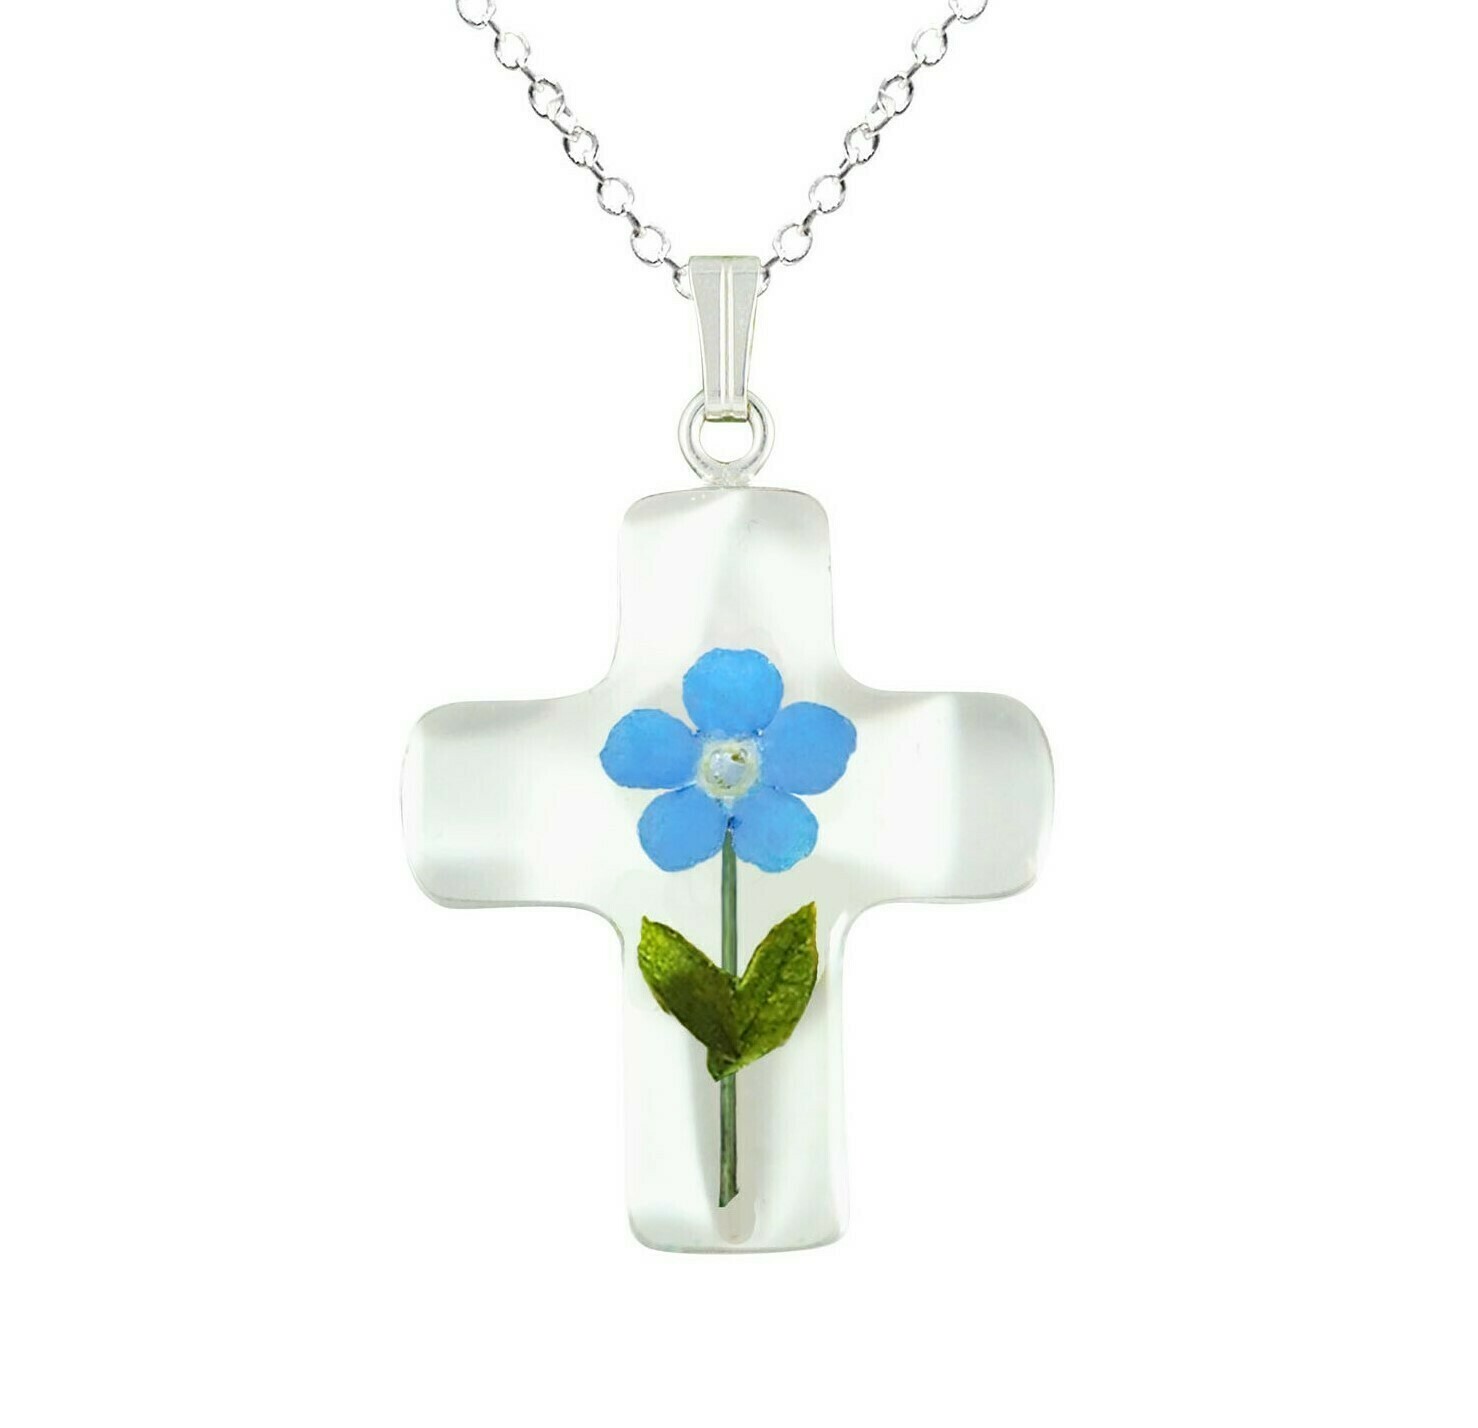 Forget-Me-Not Necklace, Medium Cross, White Background